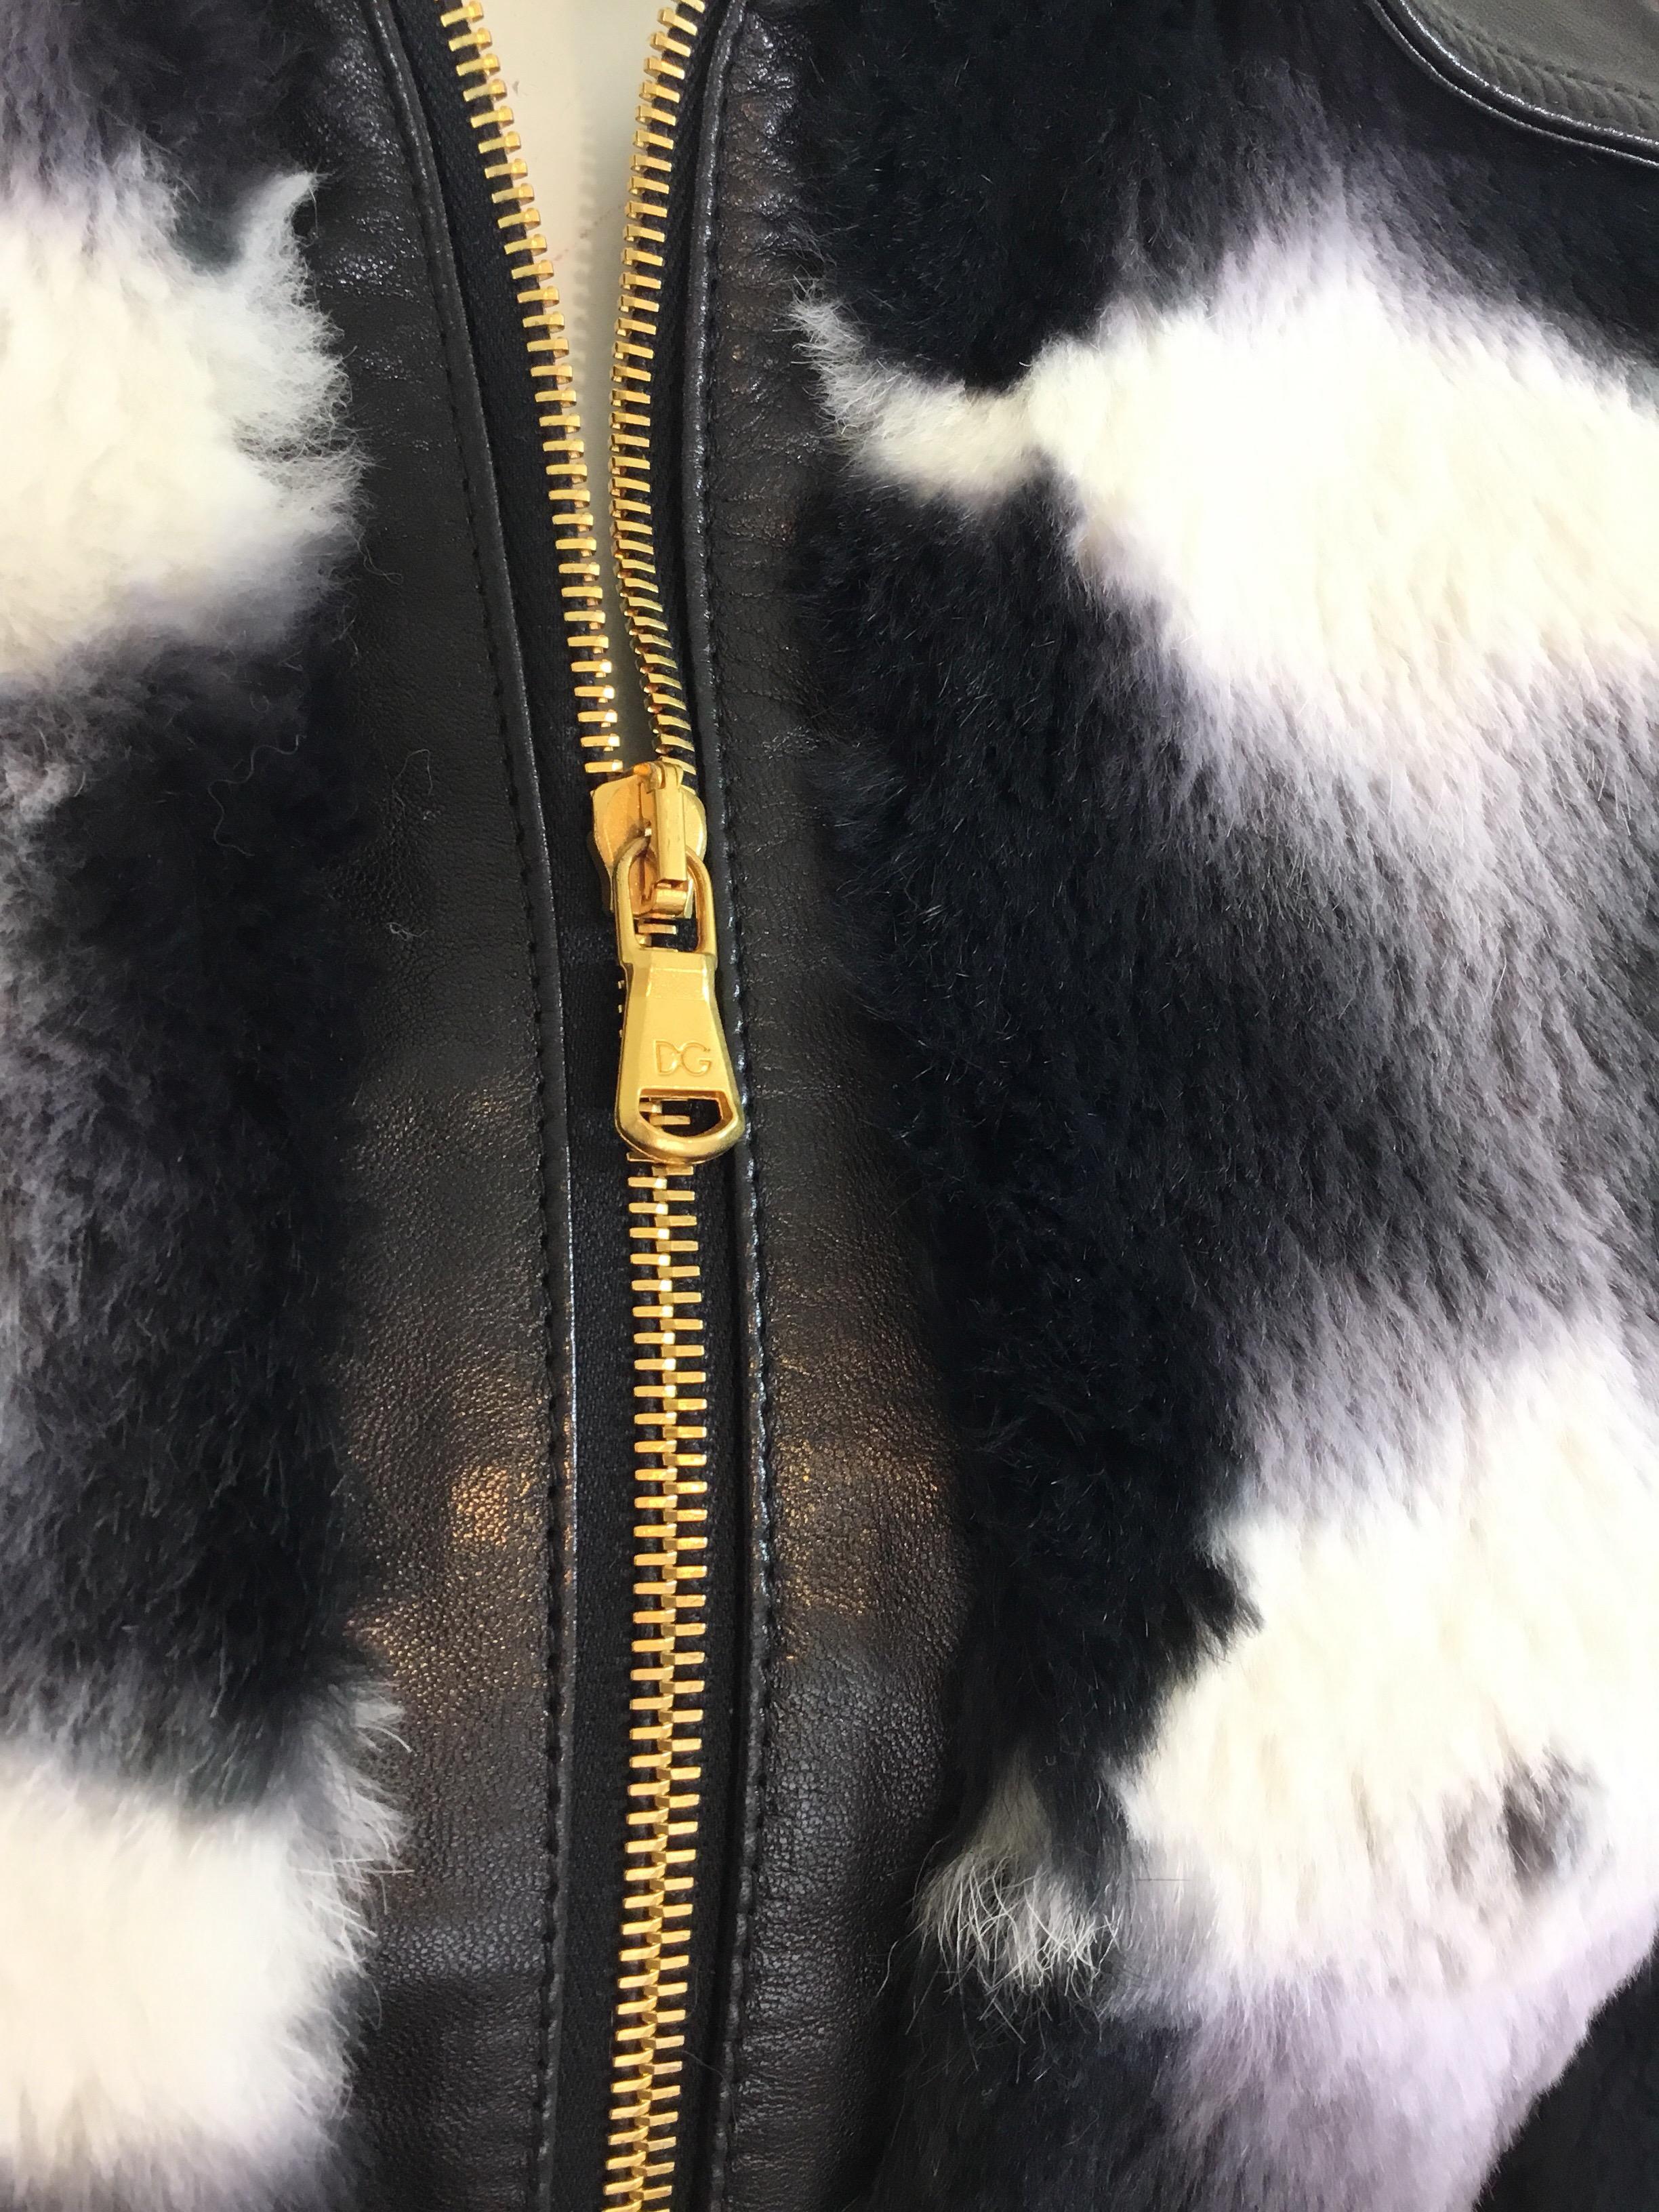 Dolce & Gabbana lapin Fur Jacket in Black and white with goldtone hardware throughout and a leather collar and cuffs. Size 44. Jacket has a zipper fastening and is fully lined. Made in Italy.

Bust 36'', sleeves 23'', length 23''